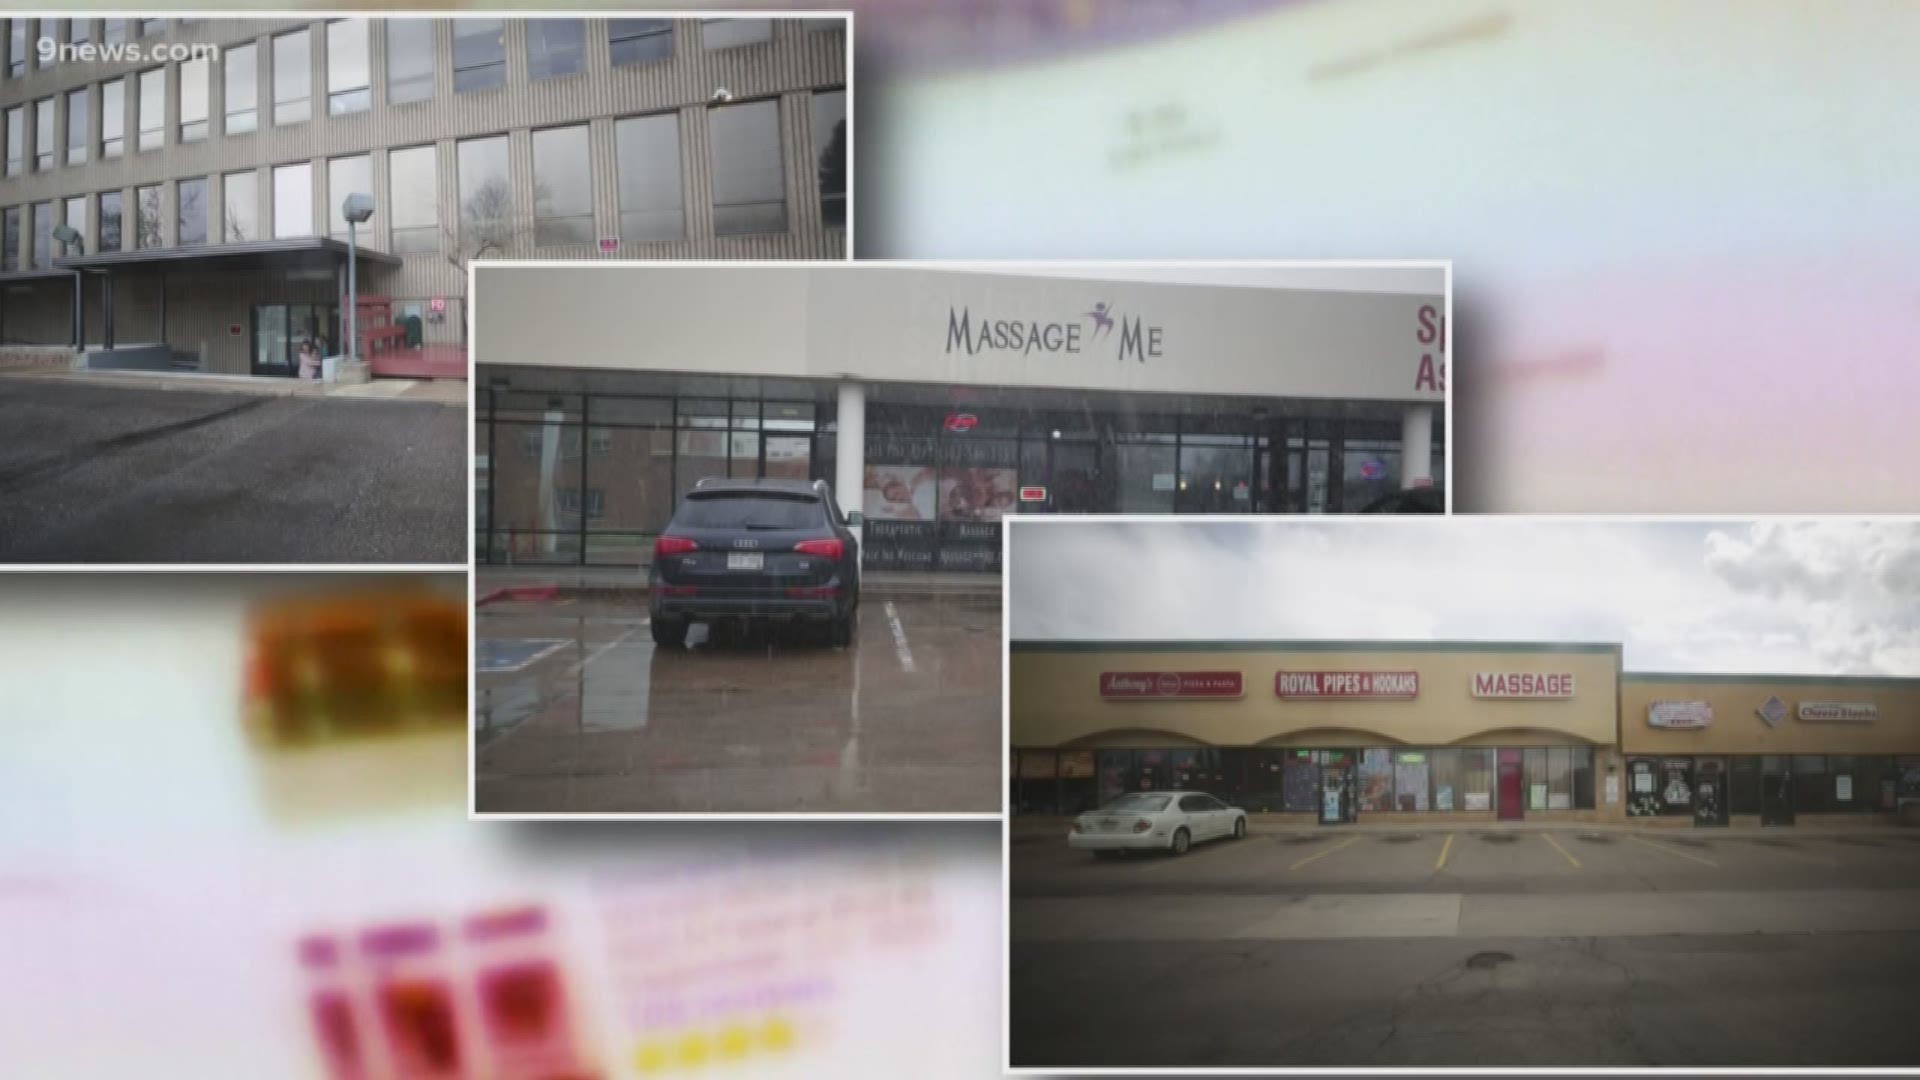 Watch part 2 of 9Wants to Know's investigation into illicit massage parlors shut down in Aurora after being suspected of human and sex trafficking.